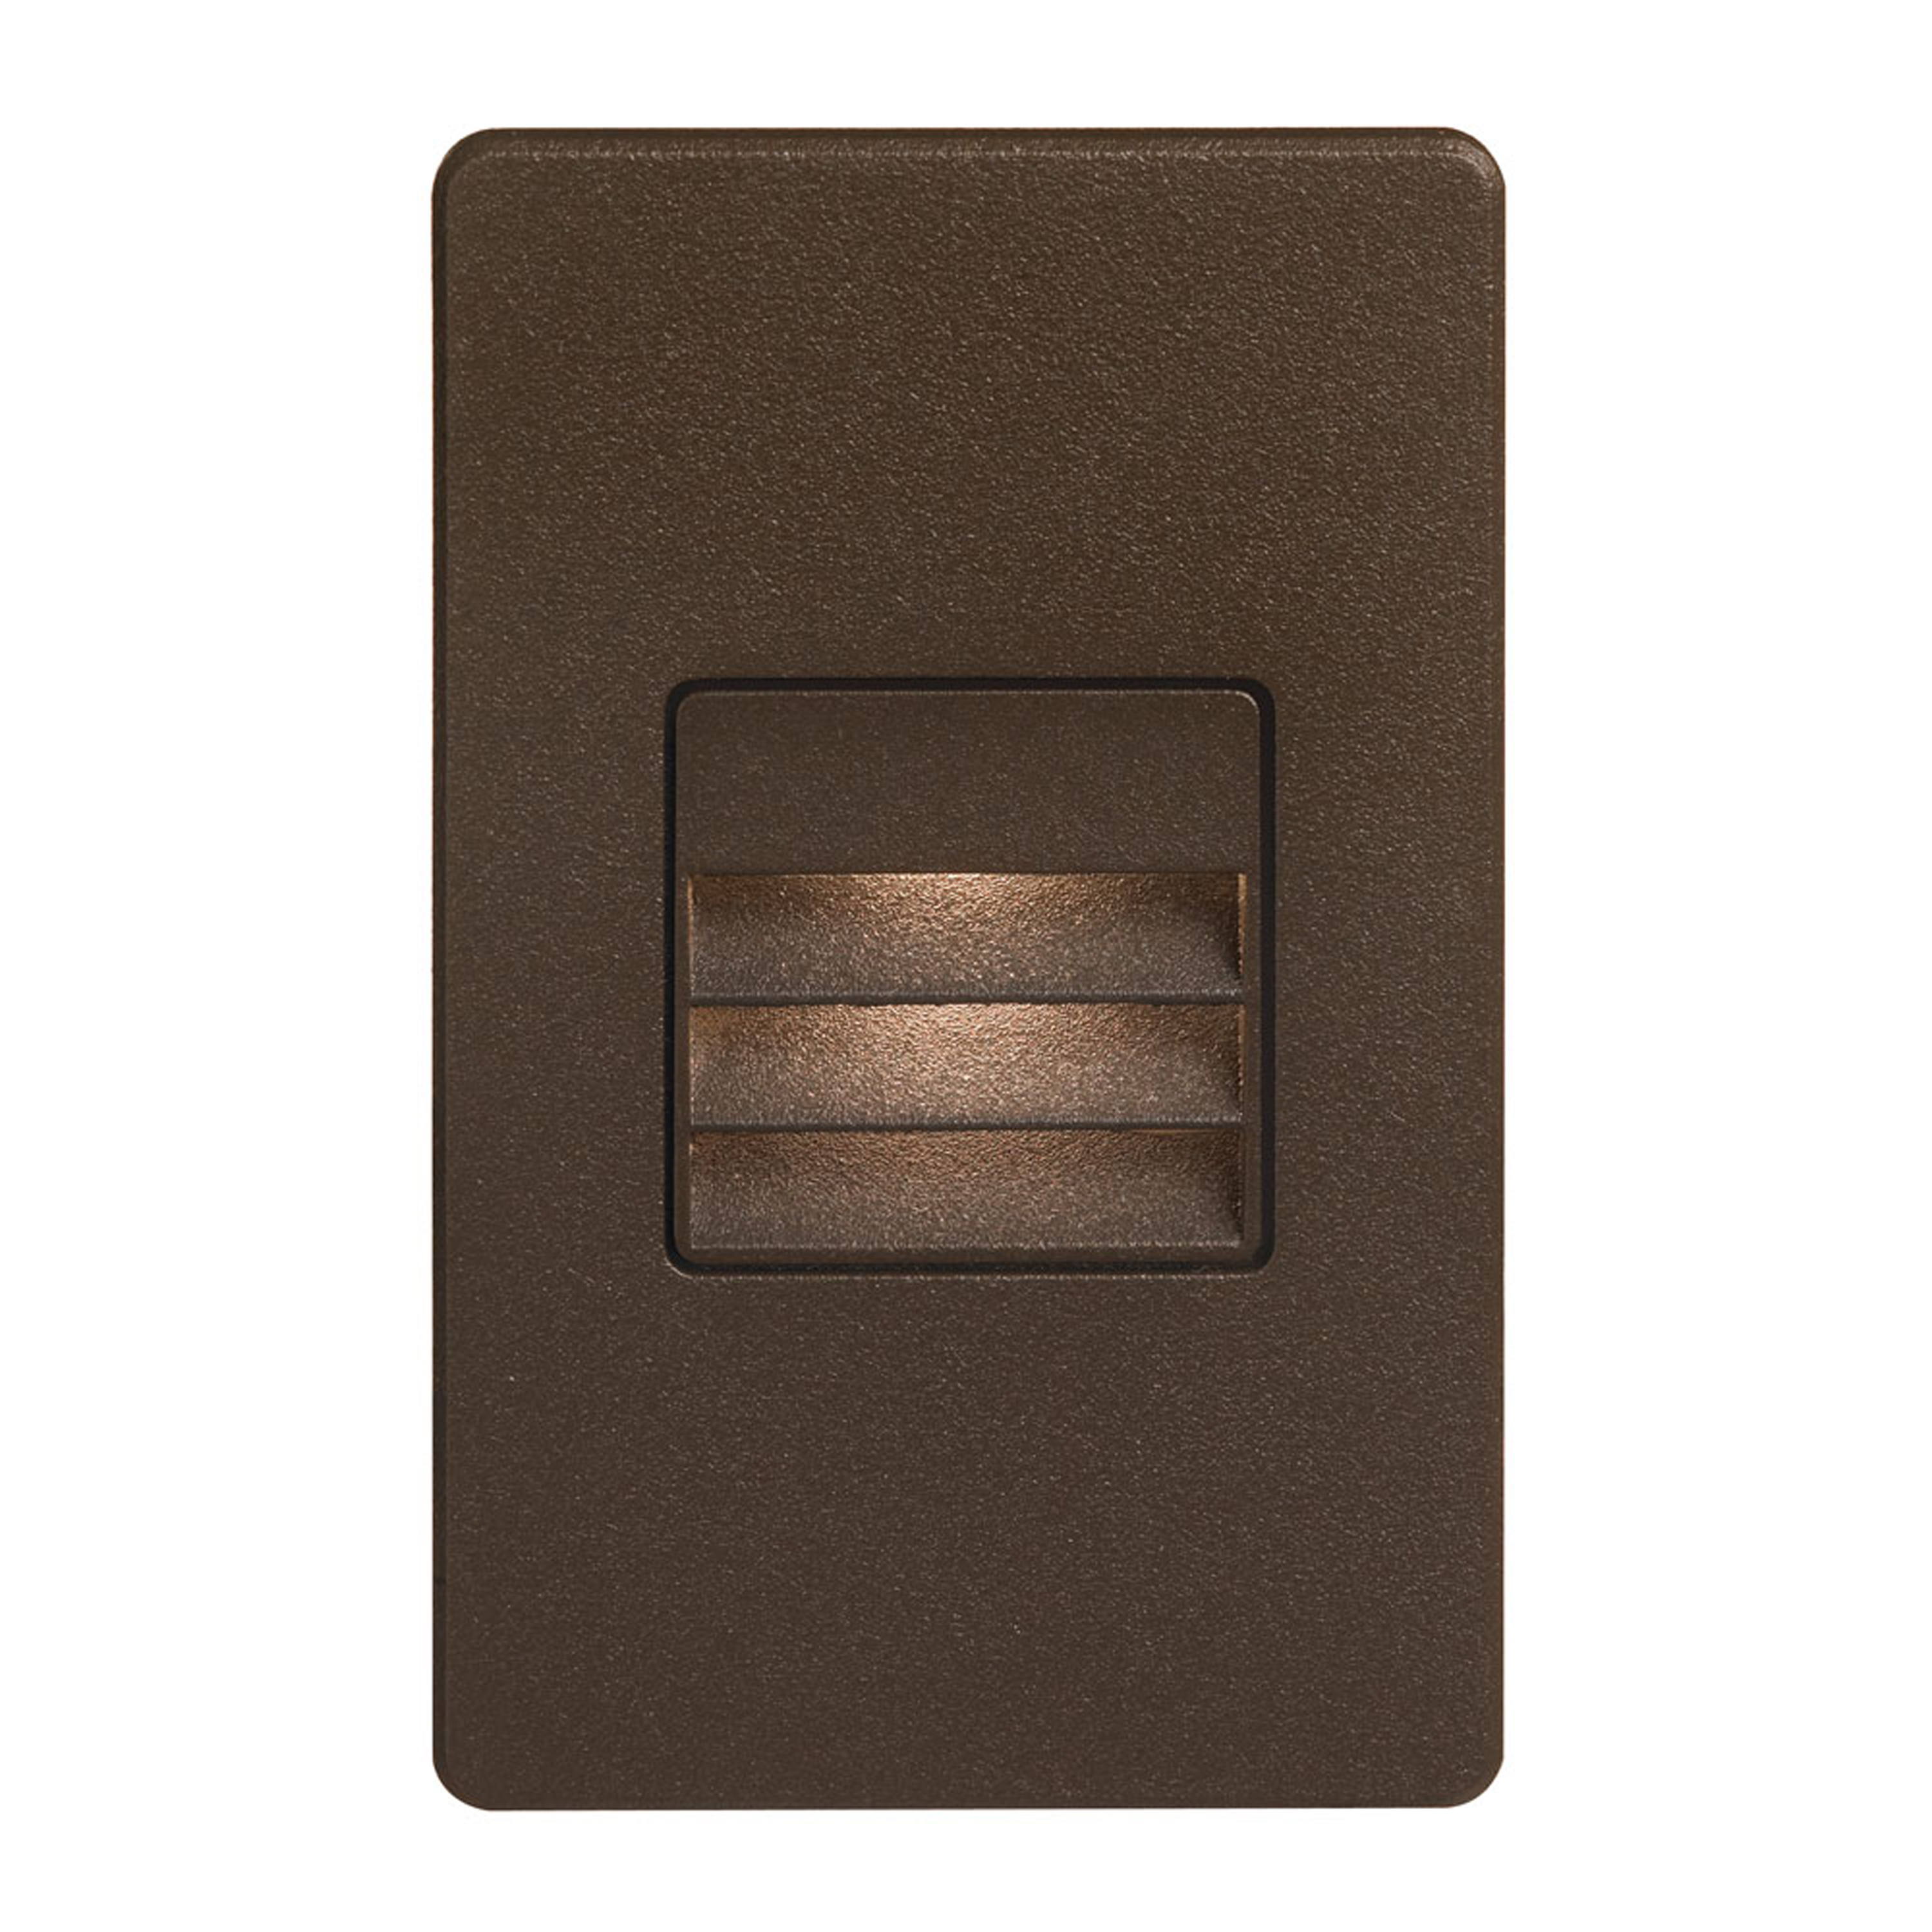 Bronze Rectangle In/Outdoor 3W LED Wa